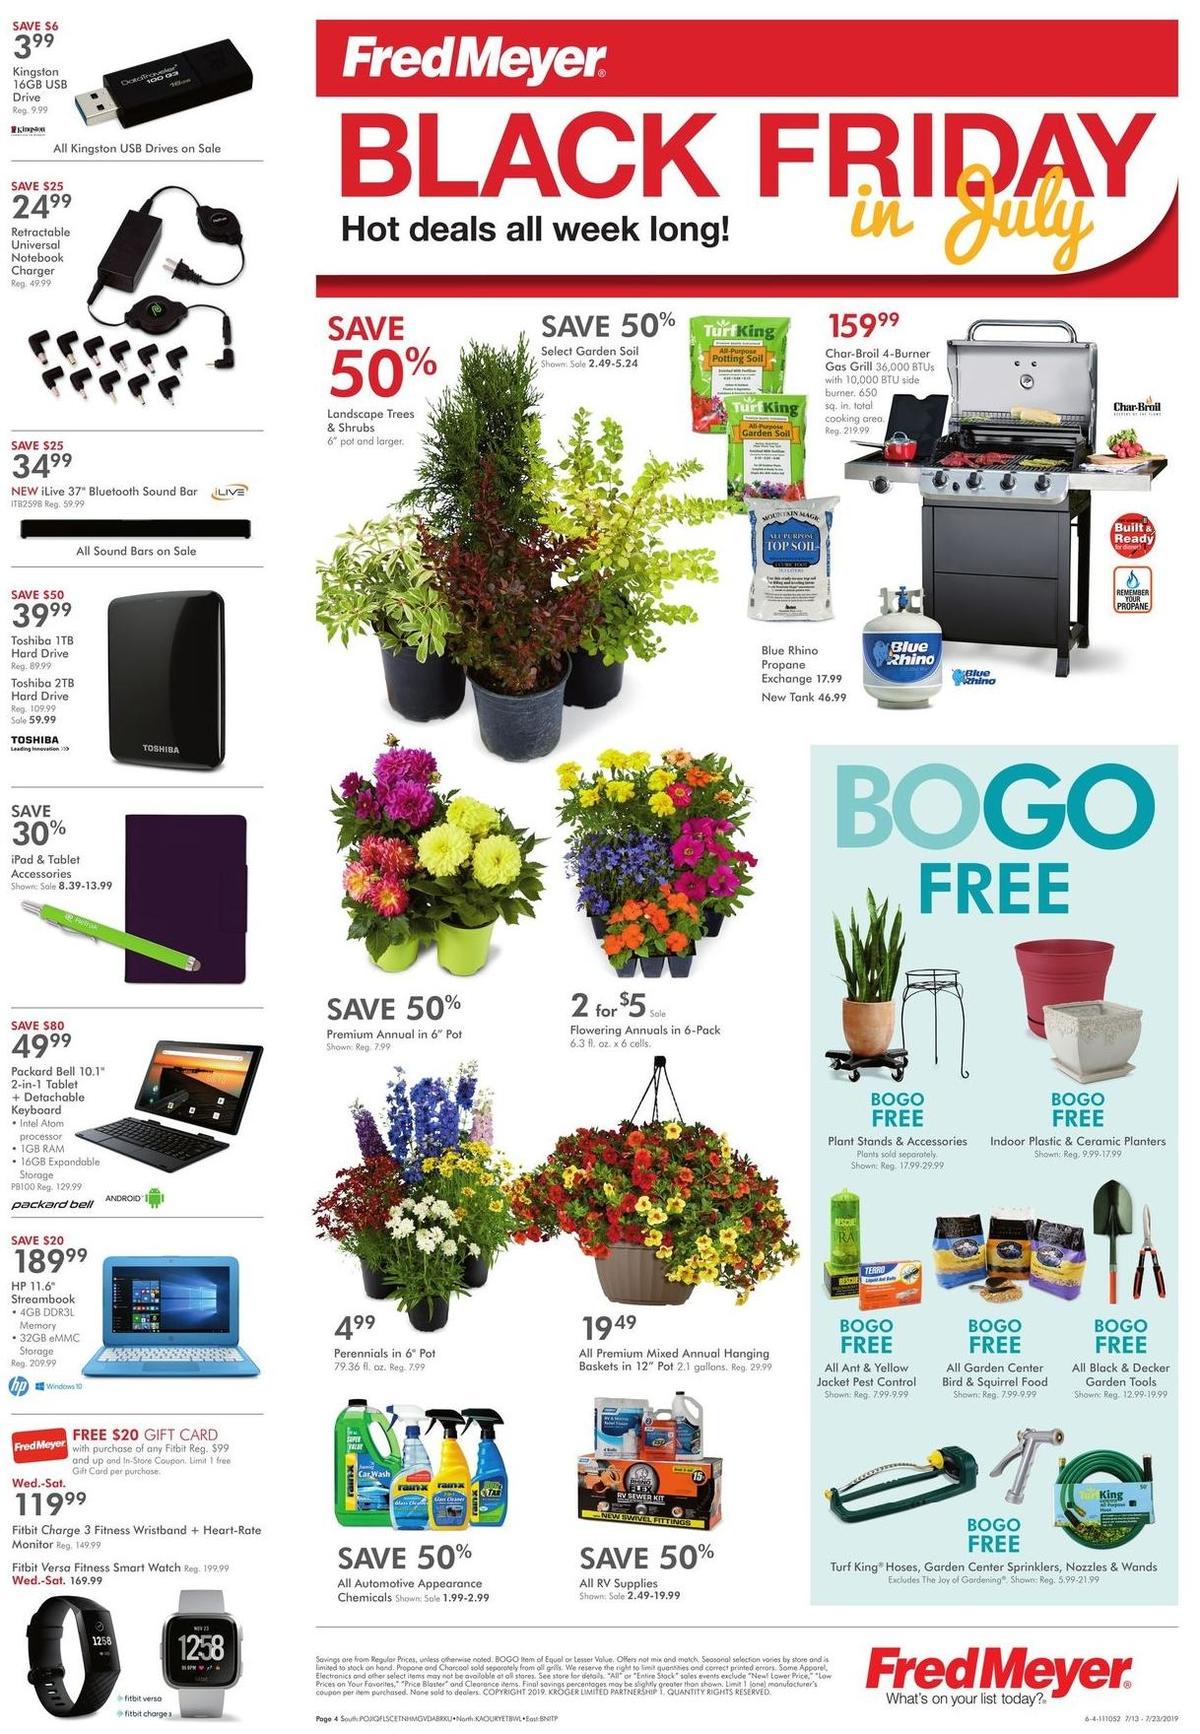 Fred Meyer Black Friday in July Weekly Ad from July 13